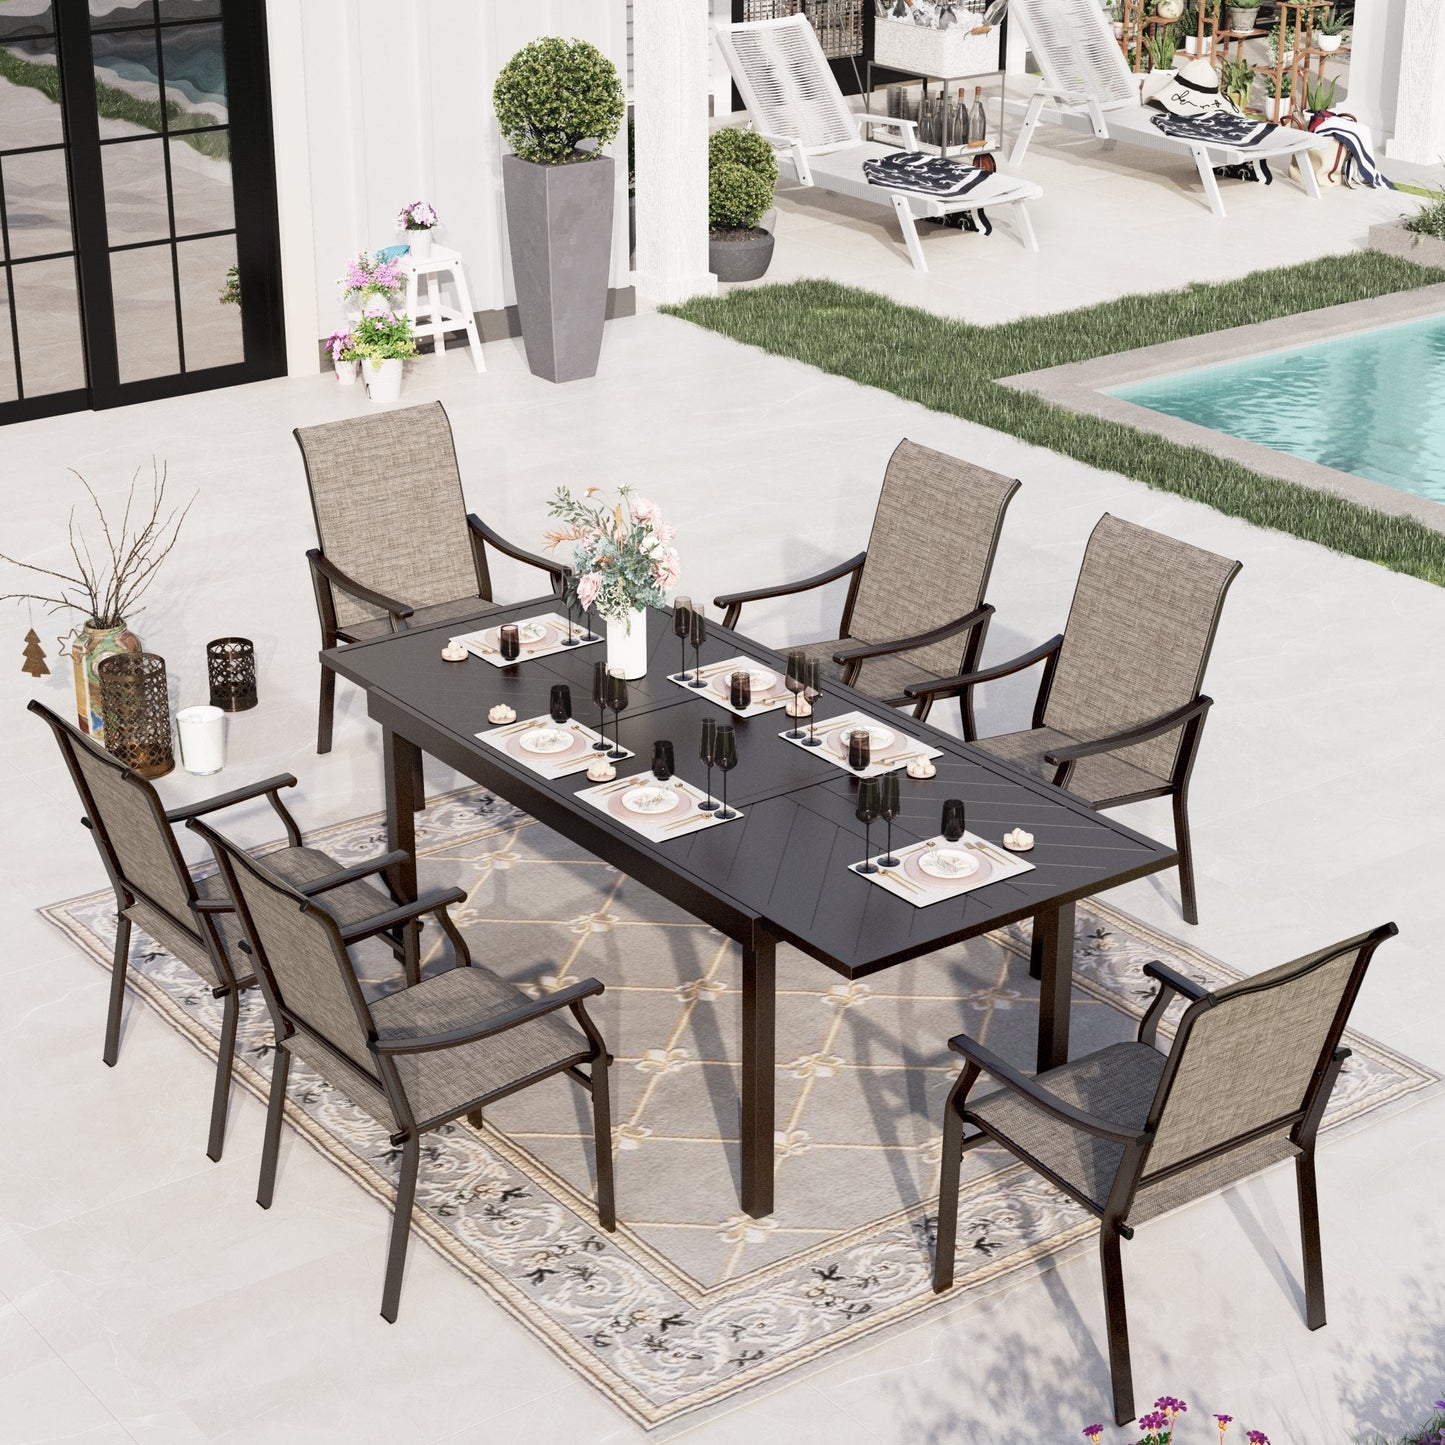 Sophia & William 7 Pieces Outdoor Patio Dining Set Textilene Chairs & Extendable Steel Table Set for 6-person